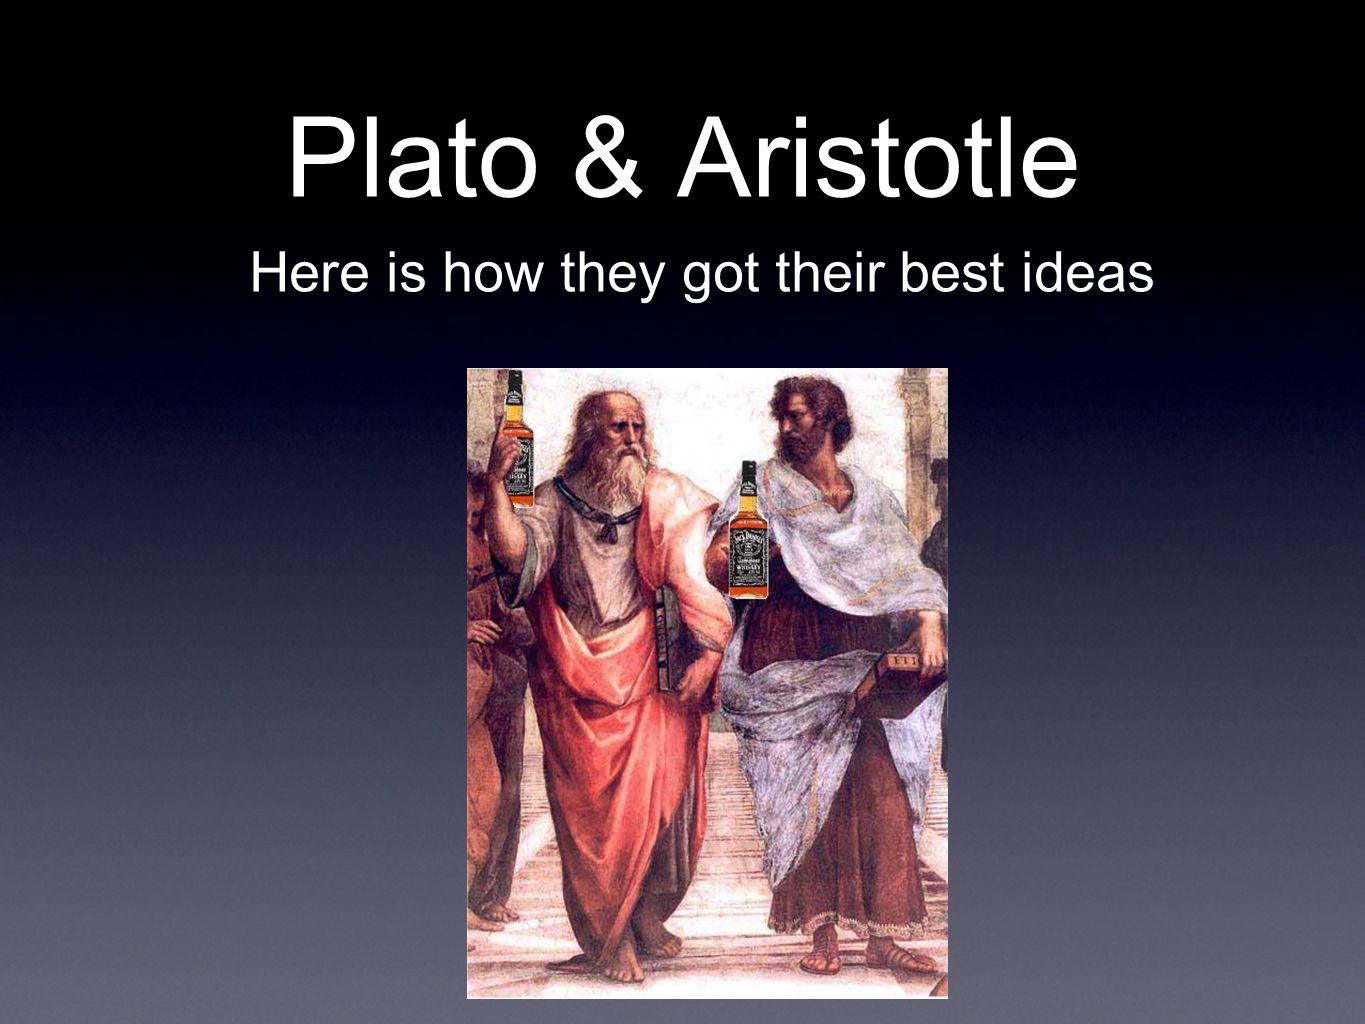 Plato & Aristotle Here is how they got their best ideas